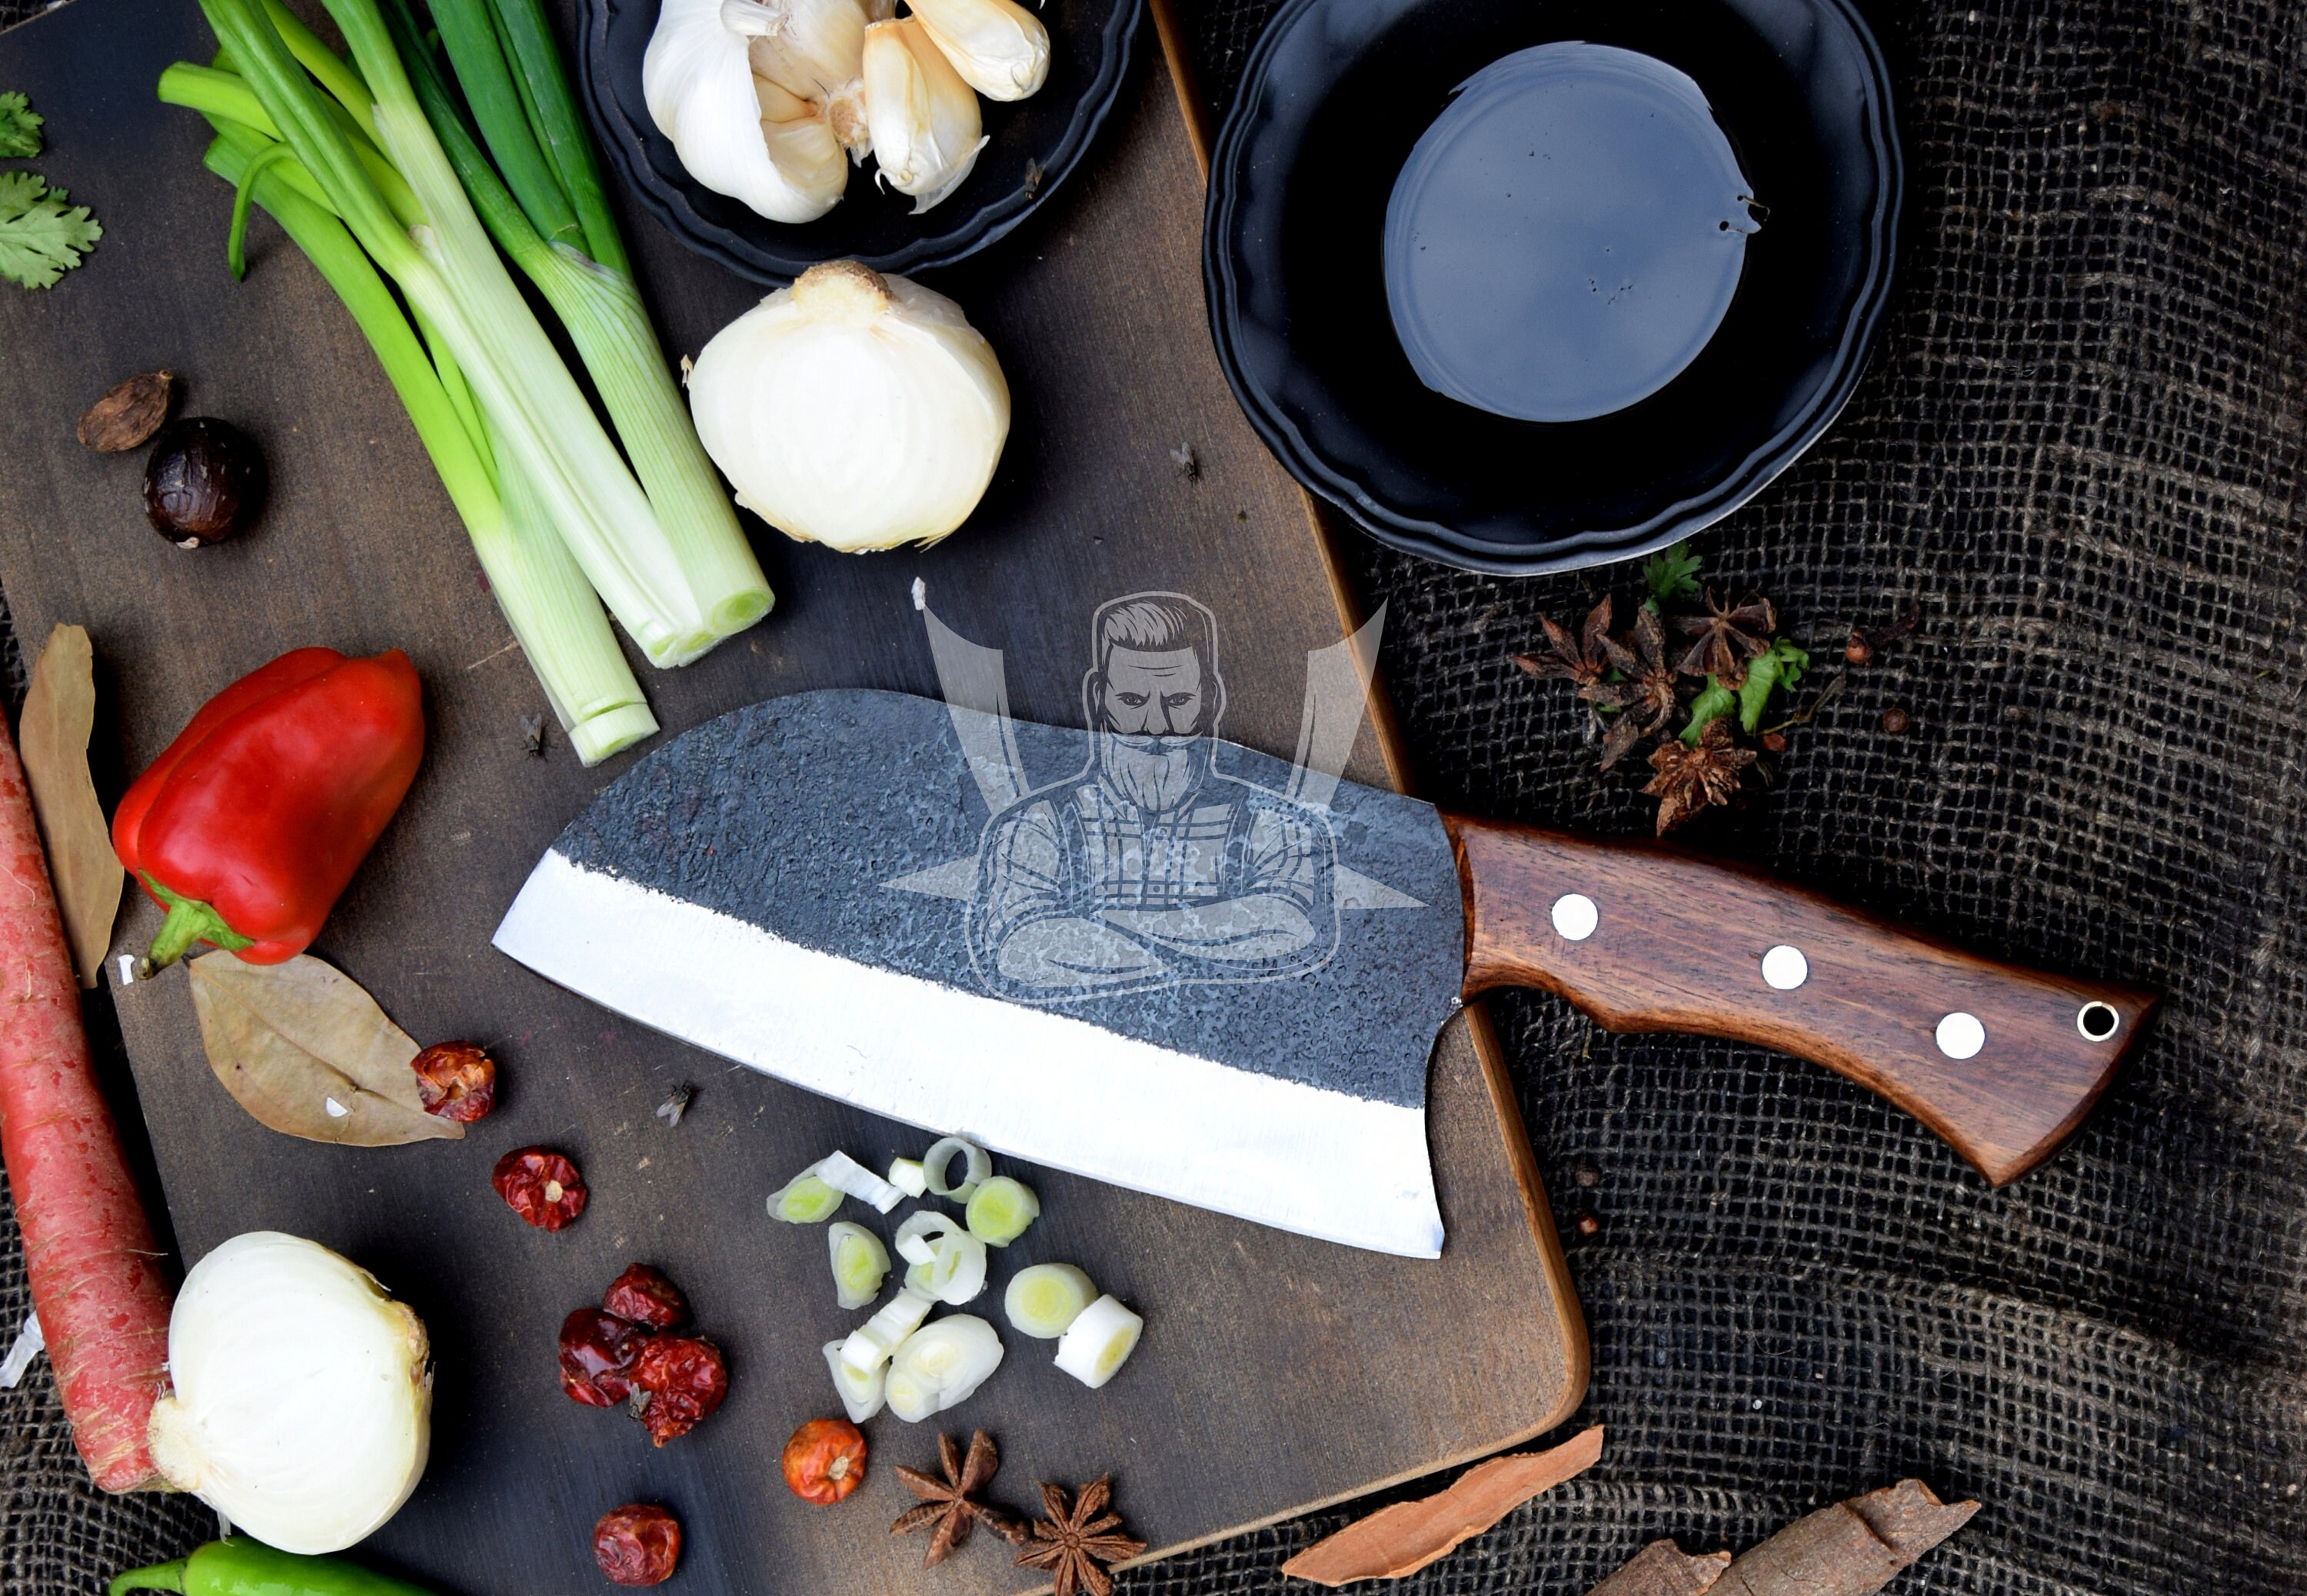 Seido Knives Hakai Chef Cleaver Knife Curve Rosewood Handle with Premium  Rosewood Leather Sheath - Artisan Crafted High Carbon Stainless Steel for